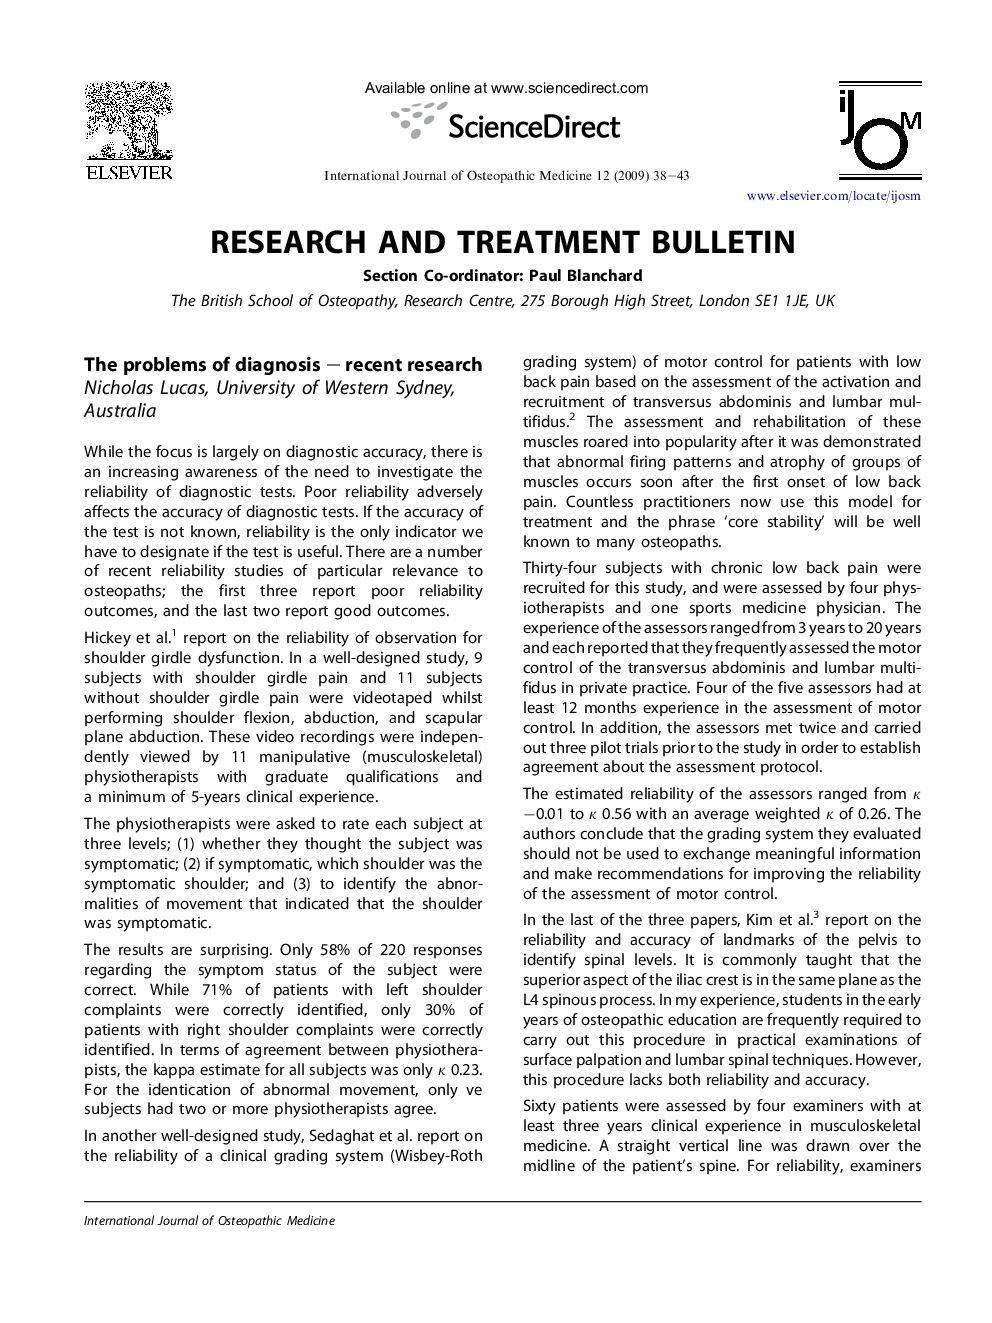 Research and treatment bulletin